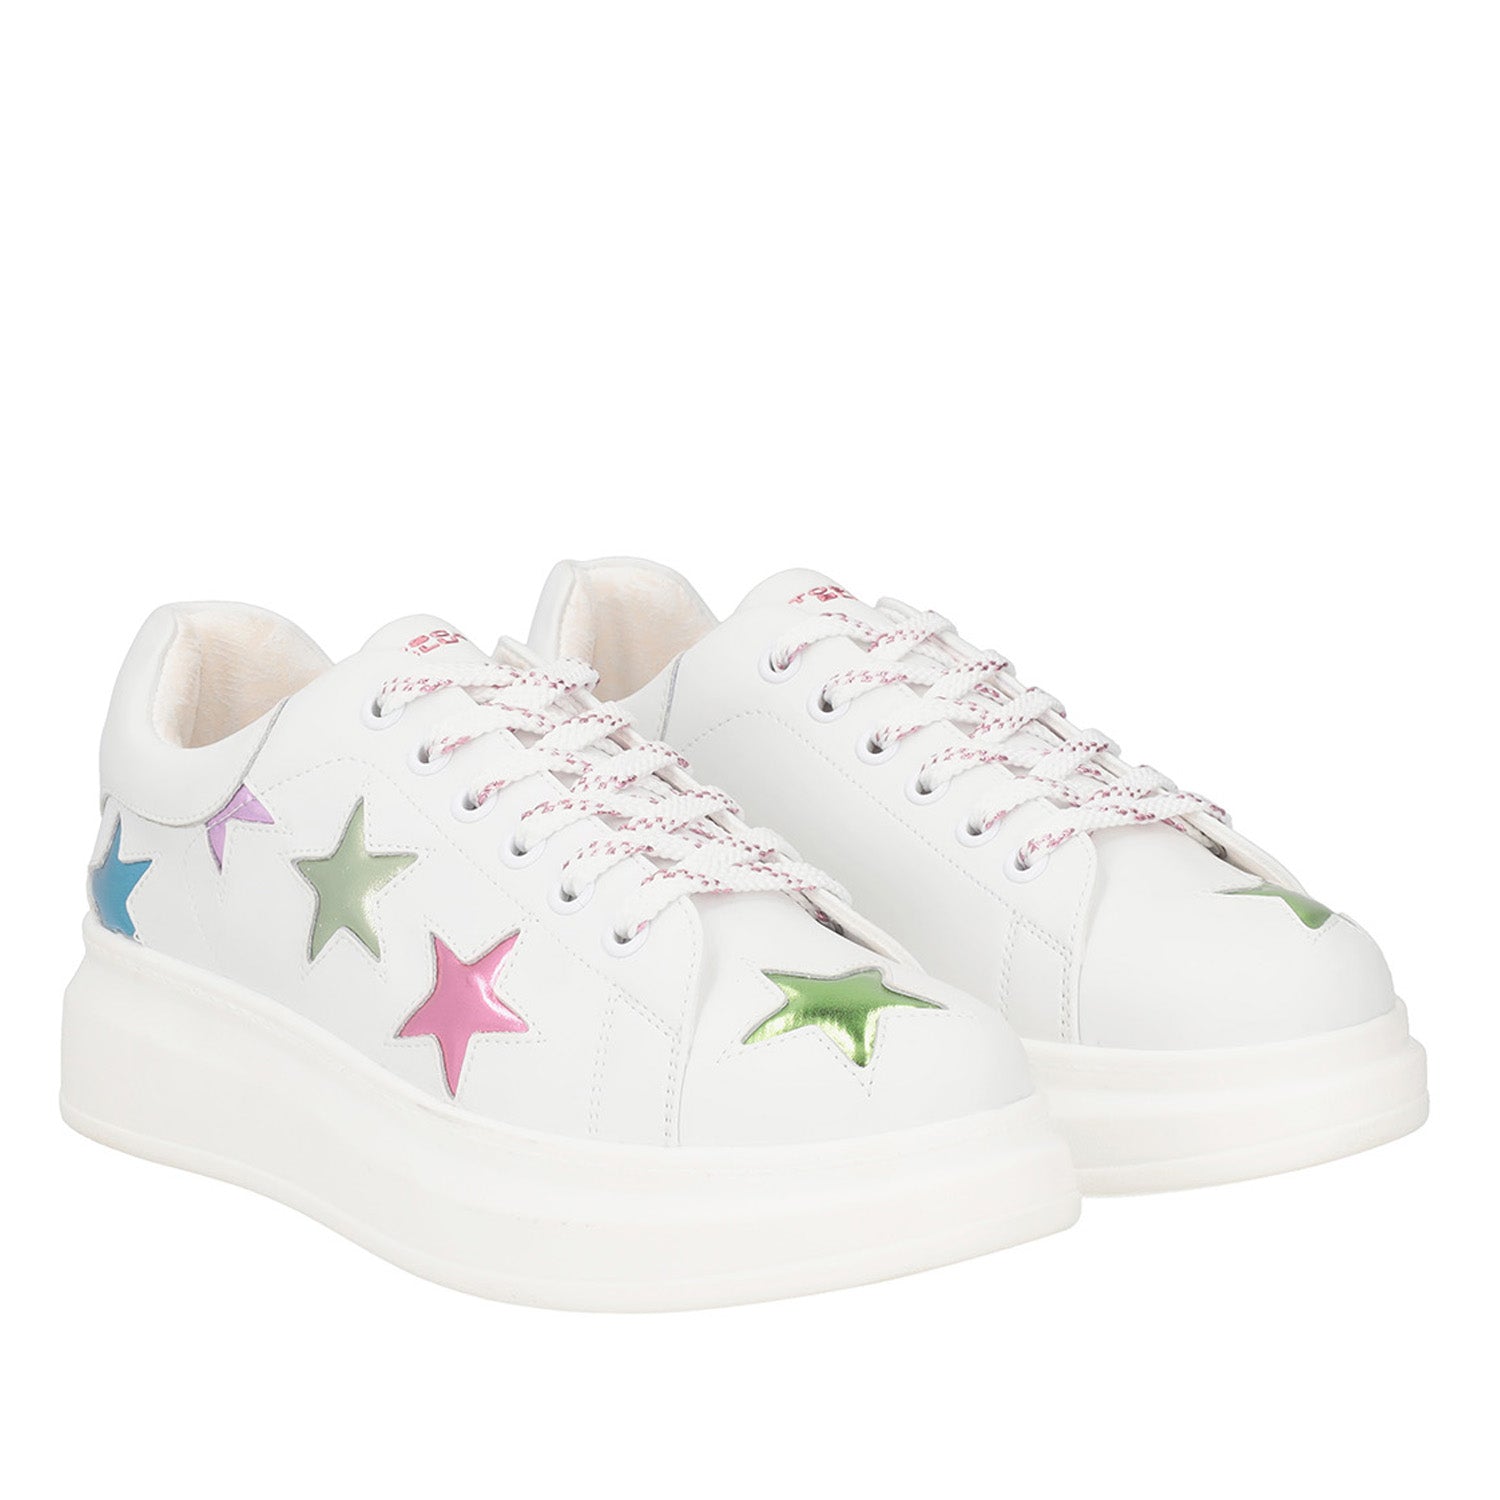 WHITE LEATHER GLAMOUR SNEAKER WITH STARS